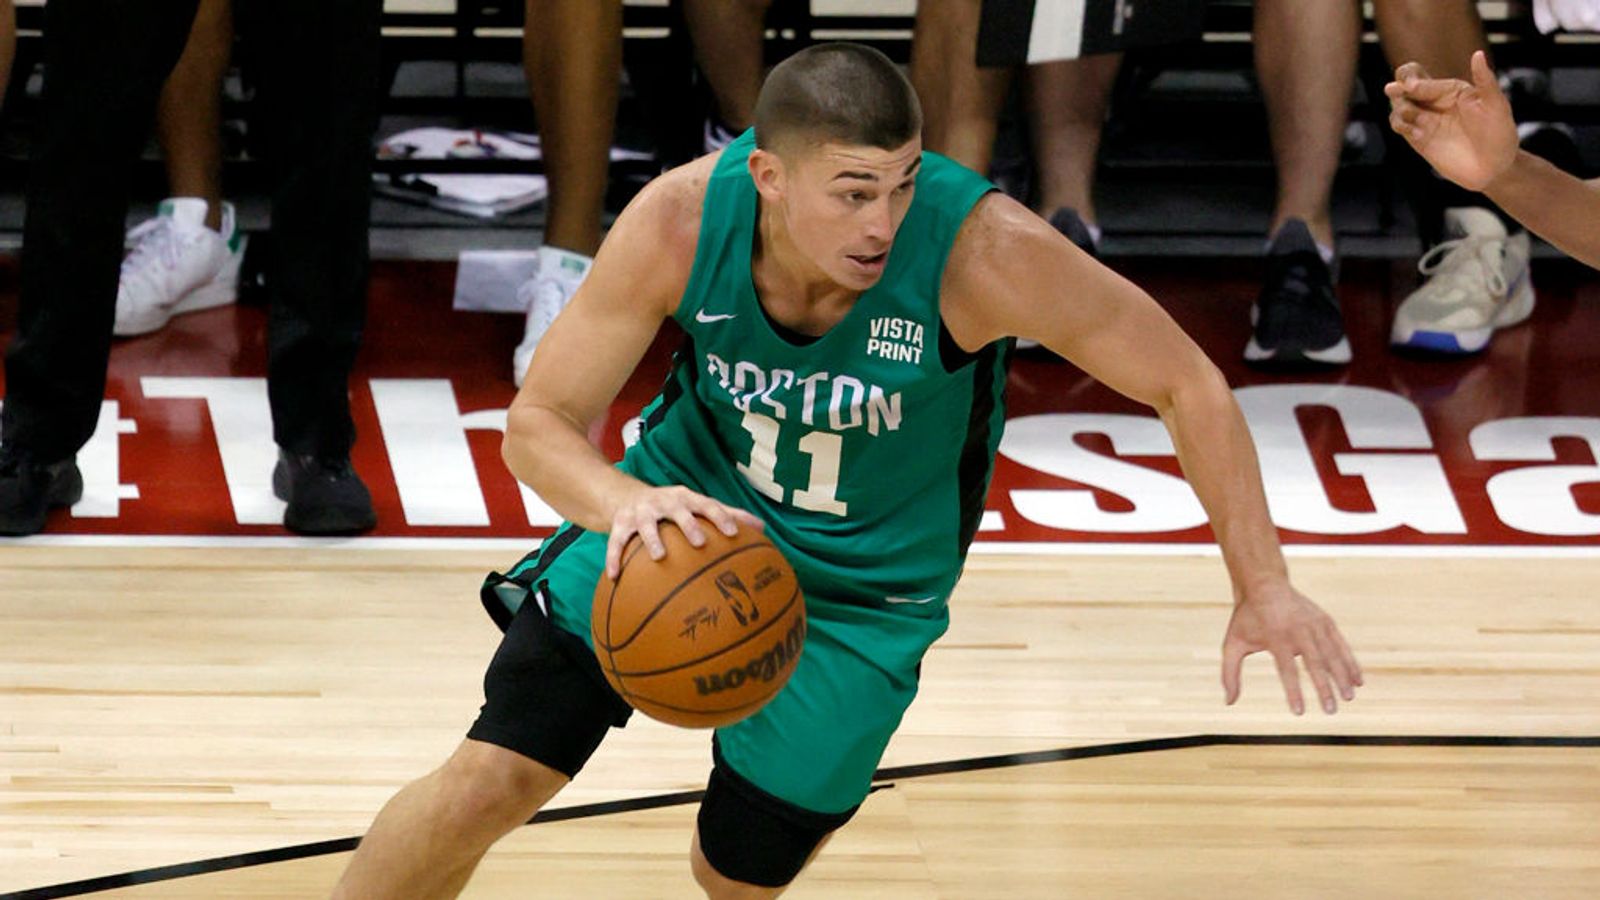 Celtics rookies Payton Pritchard and Aaron Nesmith described how they're  adjusting to the NBA